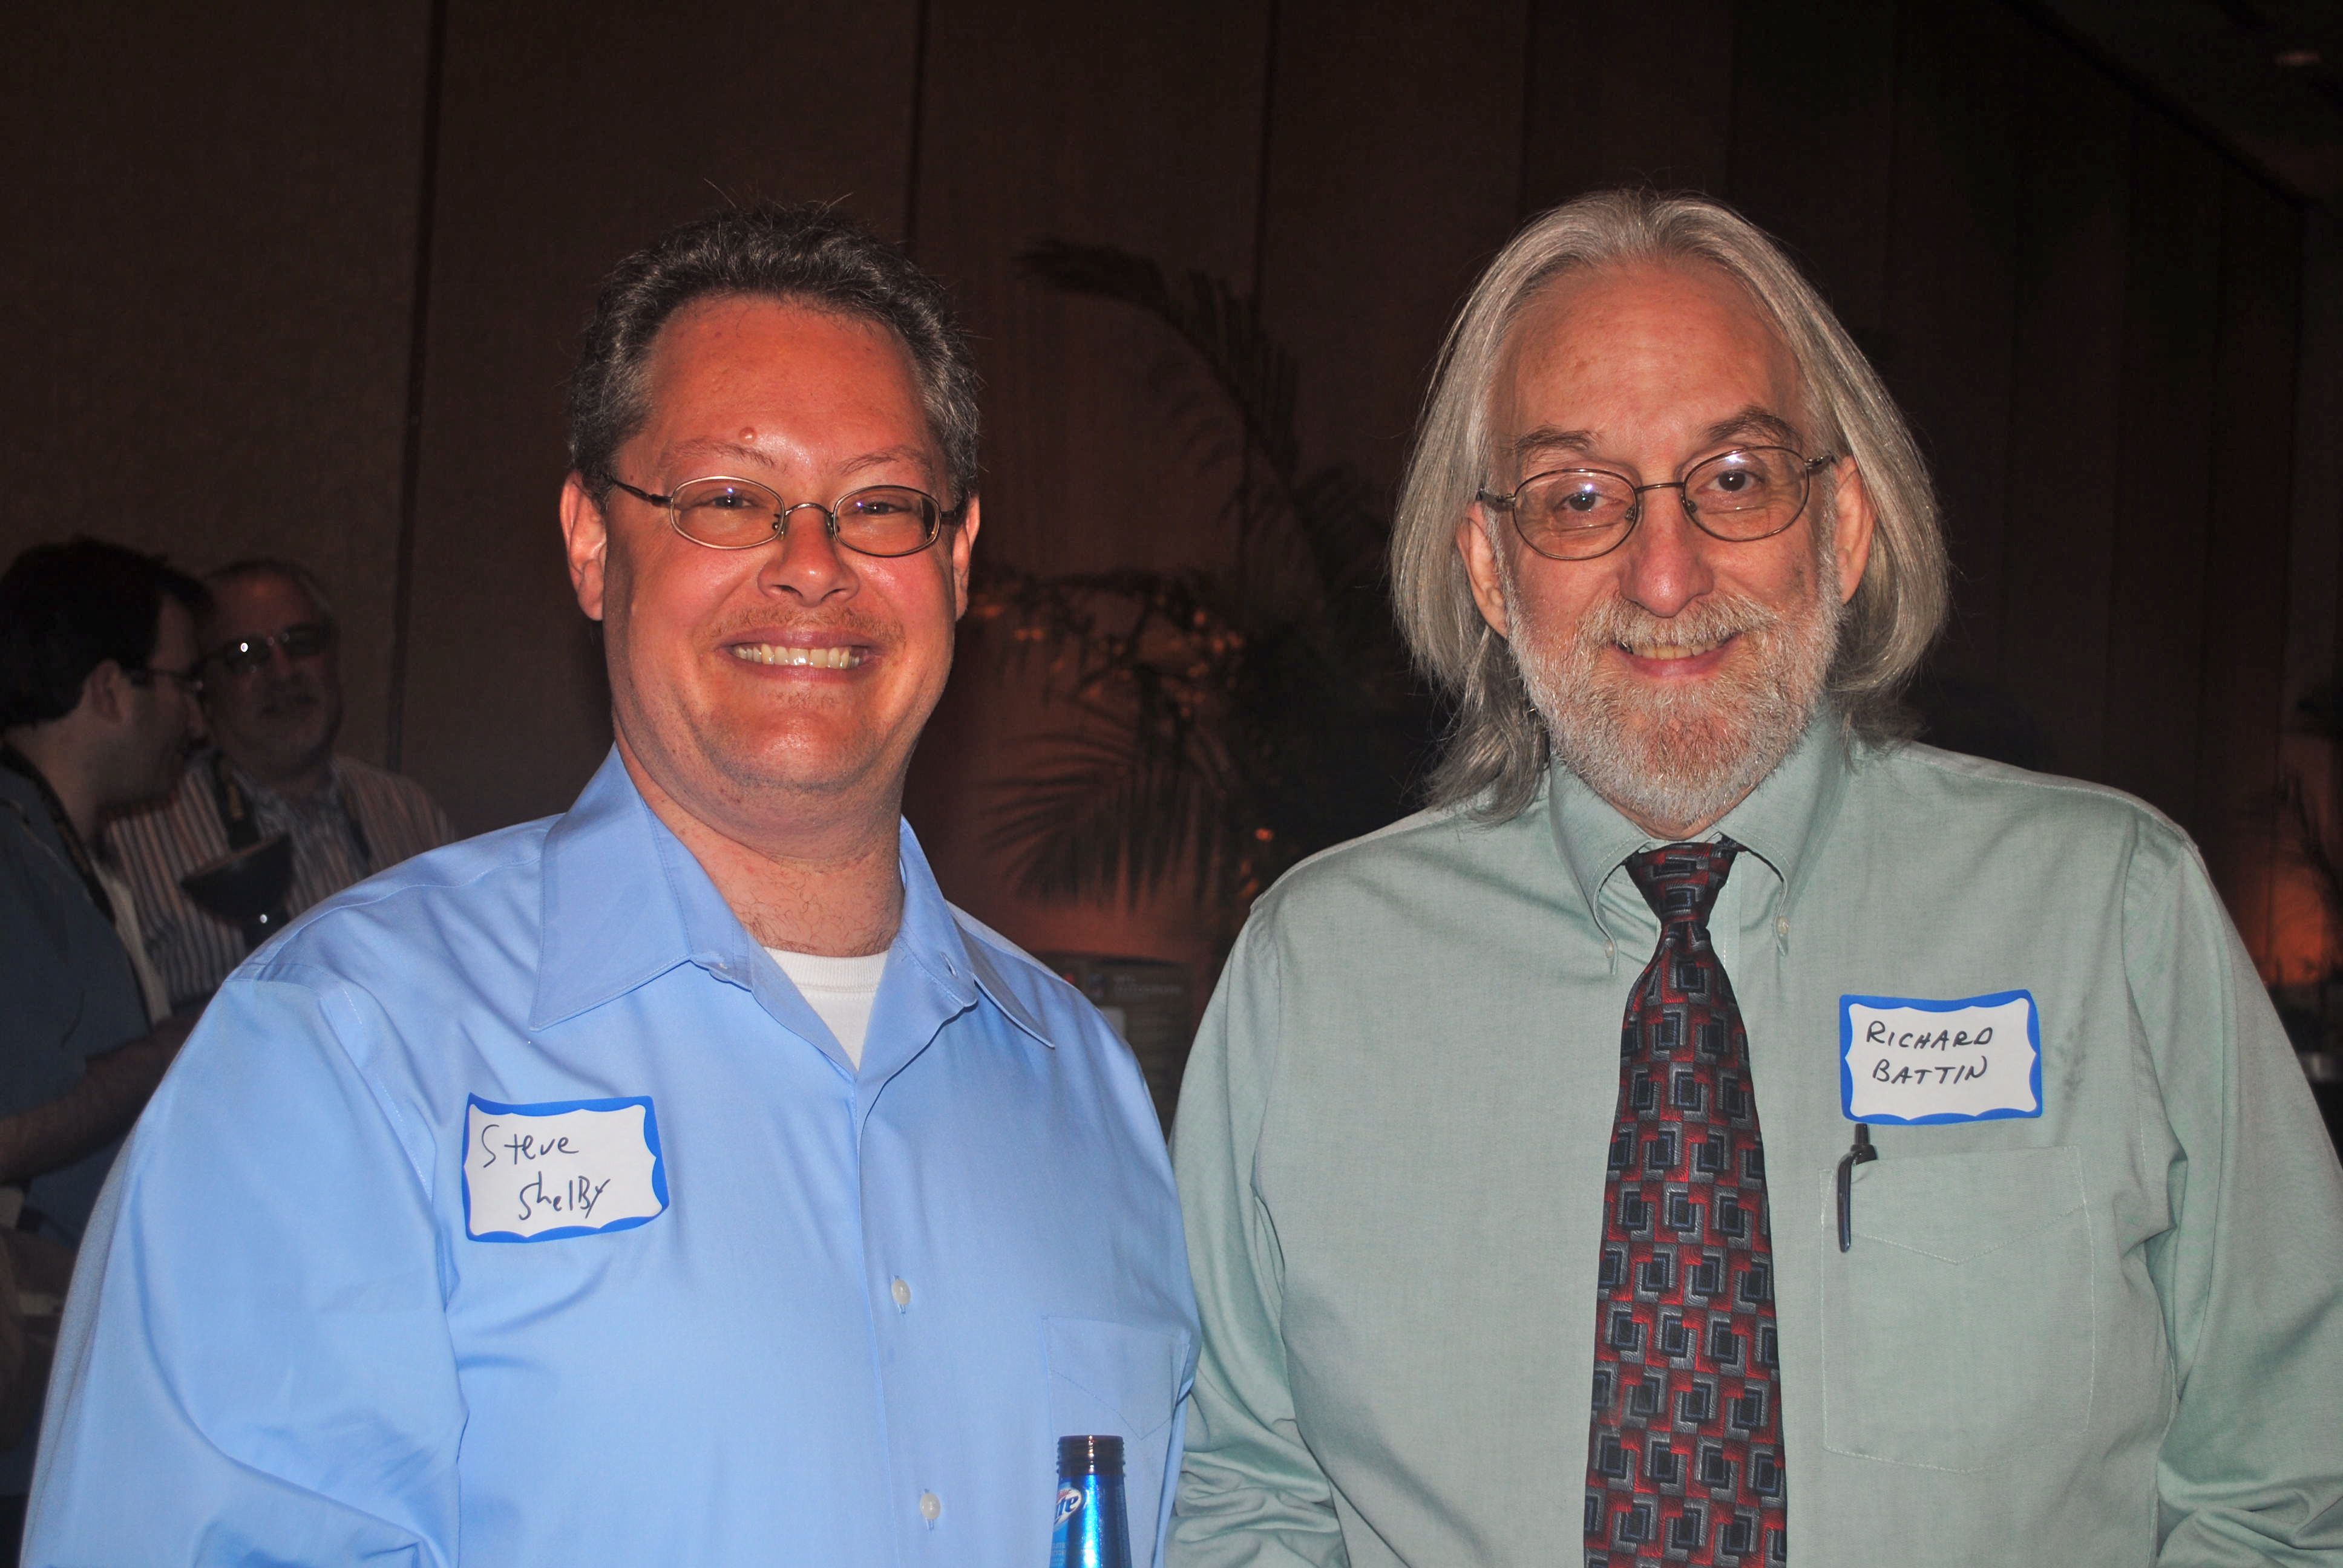 Steve Shelby of Farvision Networks, left, with Richard Battin of Surfside Systems Inc. 